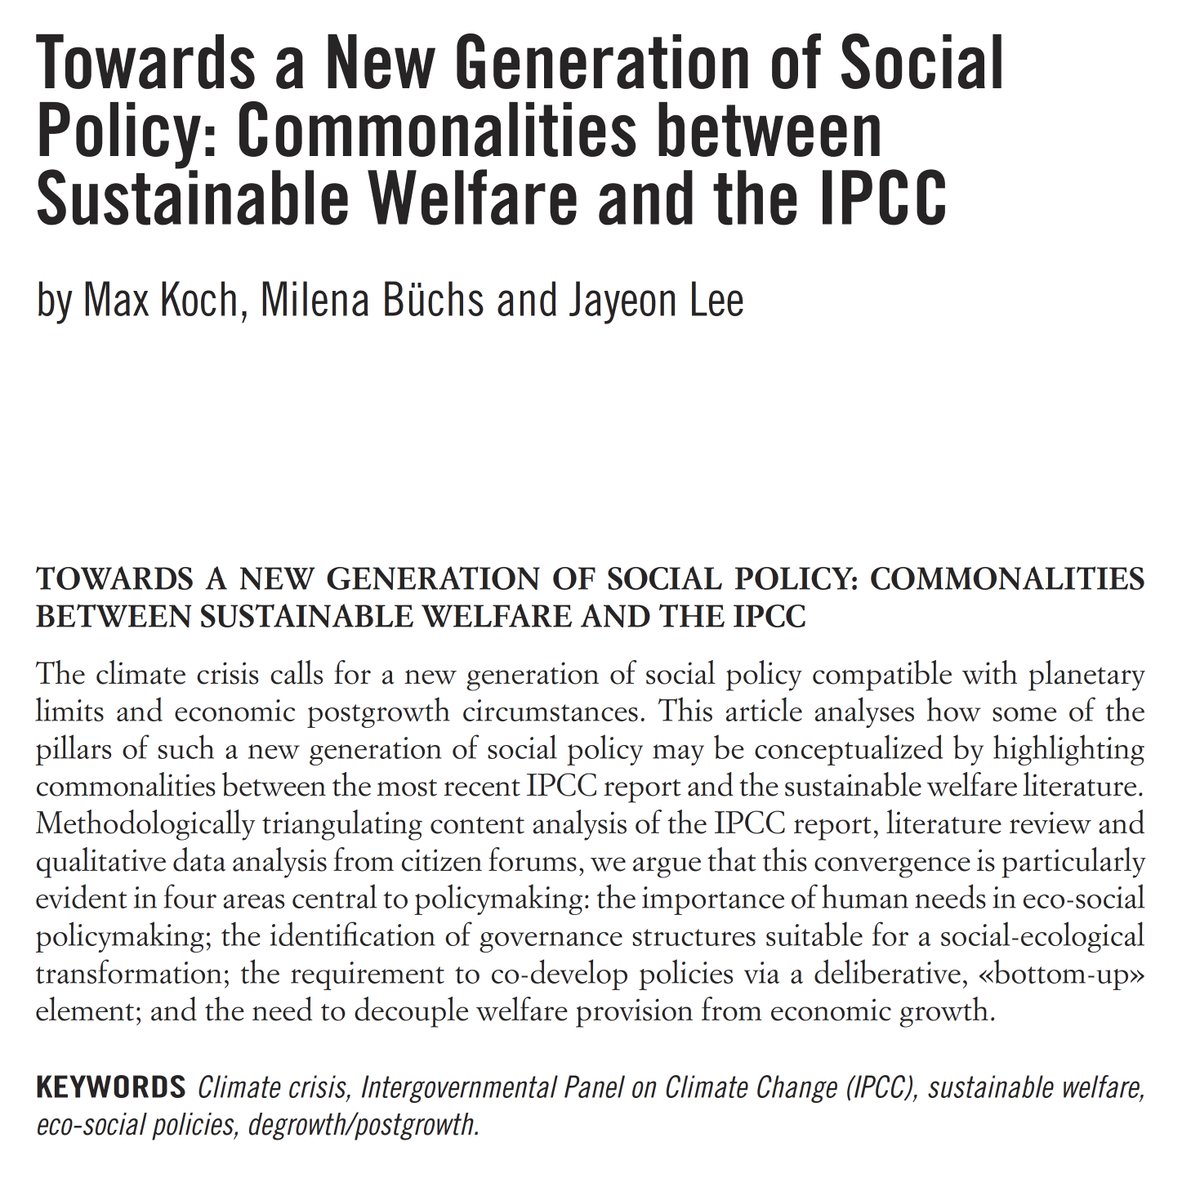 Interested in #sustainable #welfare? A new article by @ProfMaxKoch1, @mmbuchs and Jayeon Lee explores the foundations of a new generation of social policy compatible with planetary limits and #postgrowth economy.

🔓The article is available #OpenAccess!
👇
rivisteweb.it/doi/10.7389/10…